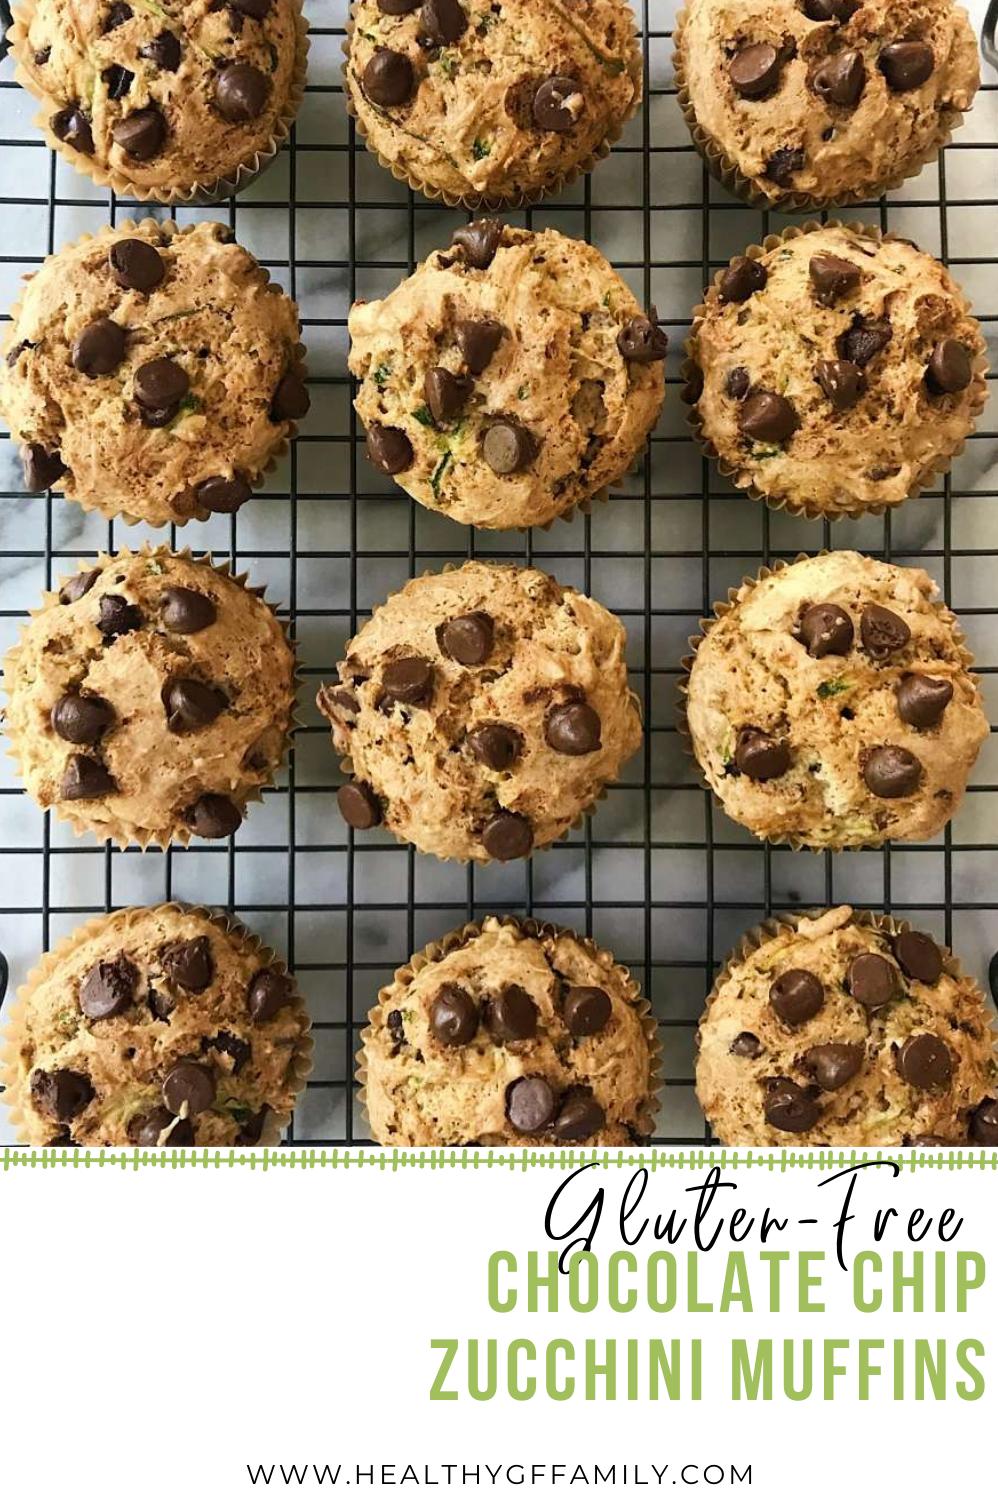  Chocolate chips make everything better, especially when mixed with zucchini in these mini-muffins.